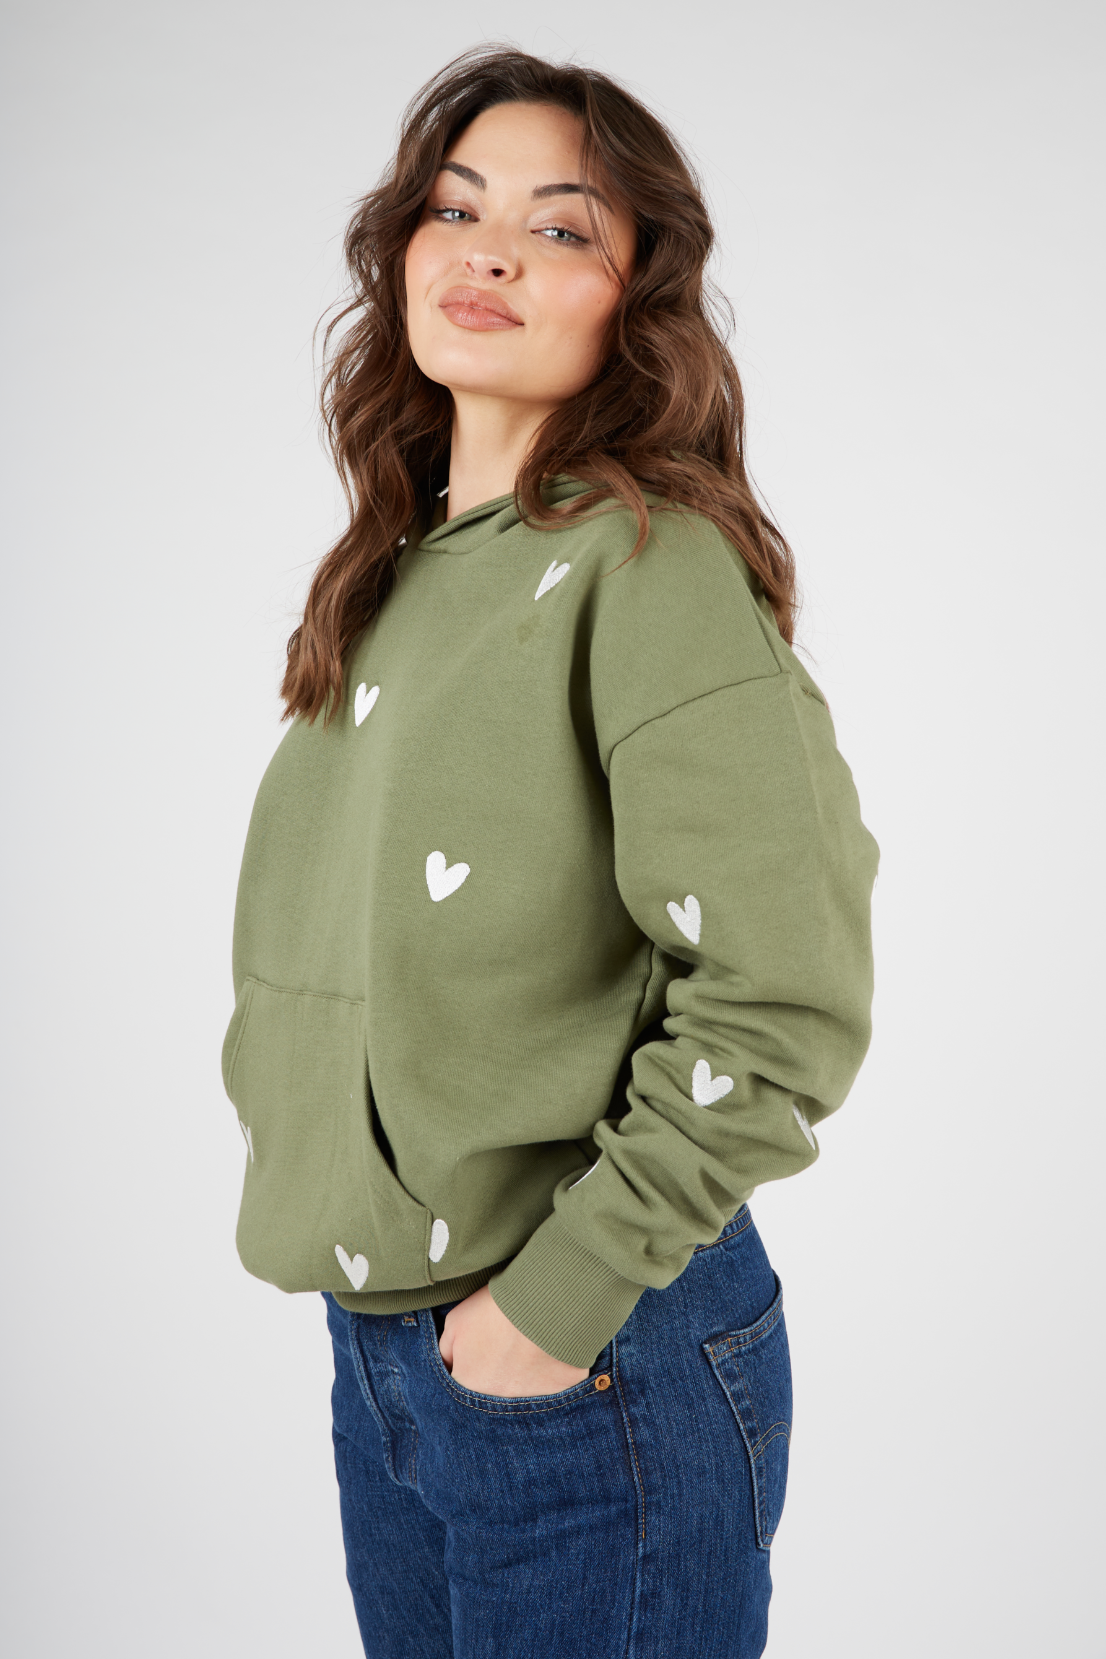 O&F Heart Embroidered Hoodie - Olive – Olive and Frank